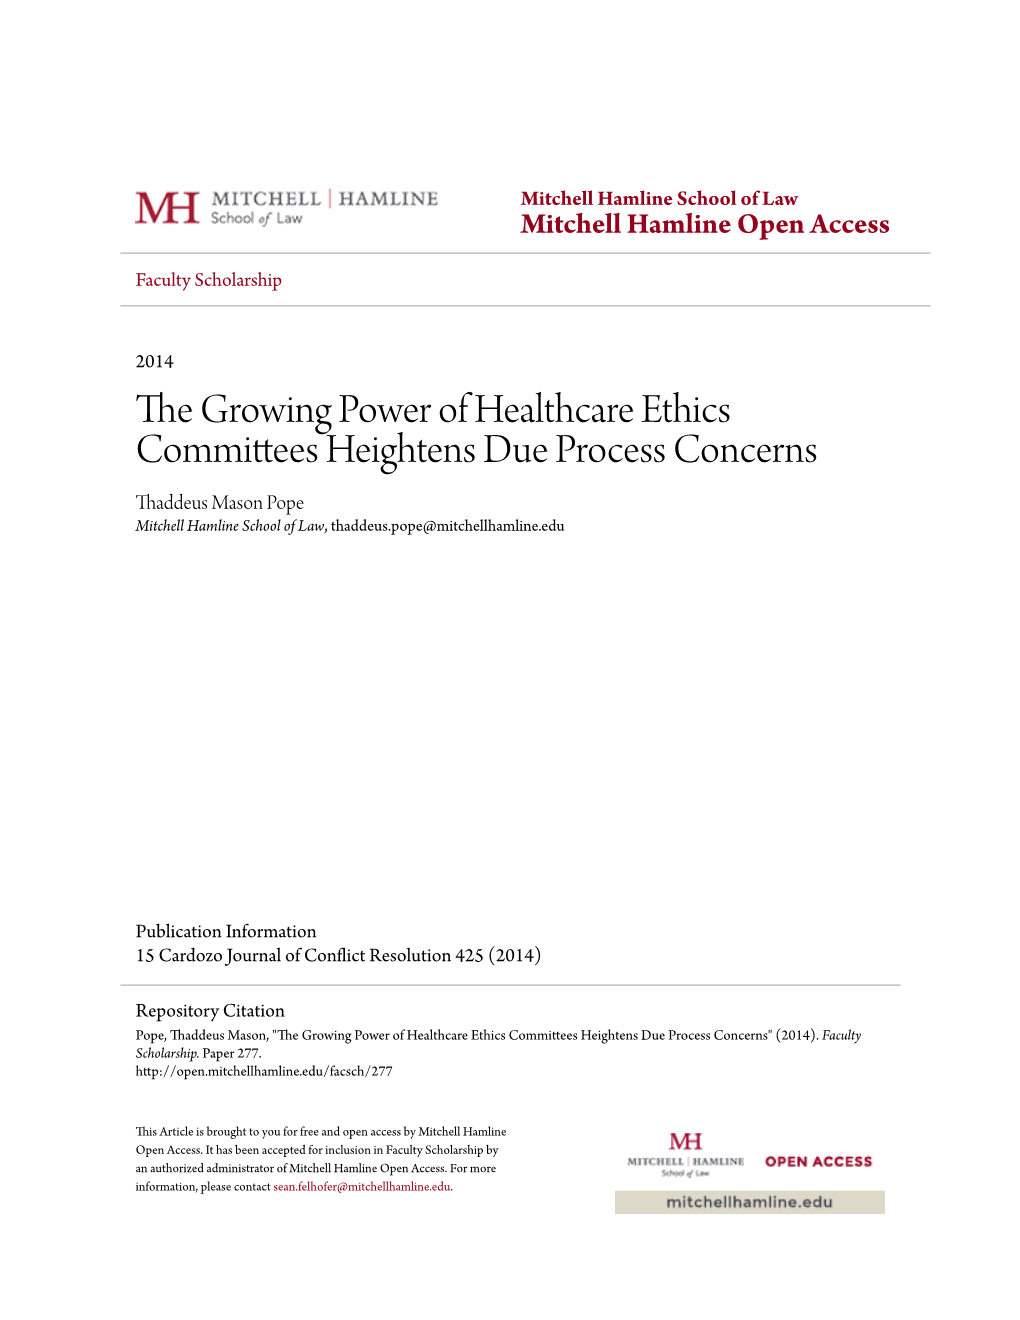 The Growing Power of Healthcare Ethics Committees Heightens Due Process Concerns Thaddeus Mason Pope Mitchell Hamline School of Law, Thaddeus.Pope@Mitchellhamline.Edu